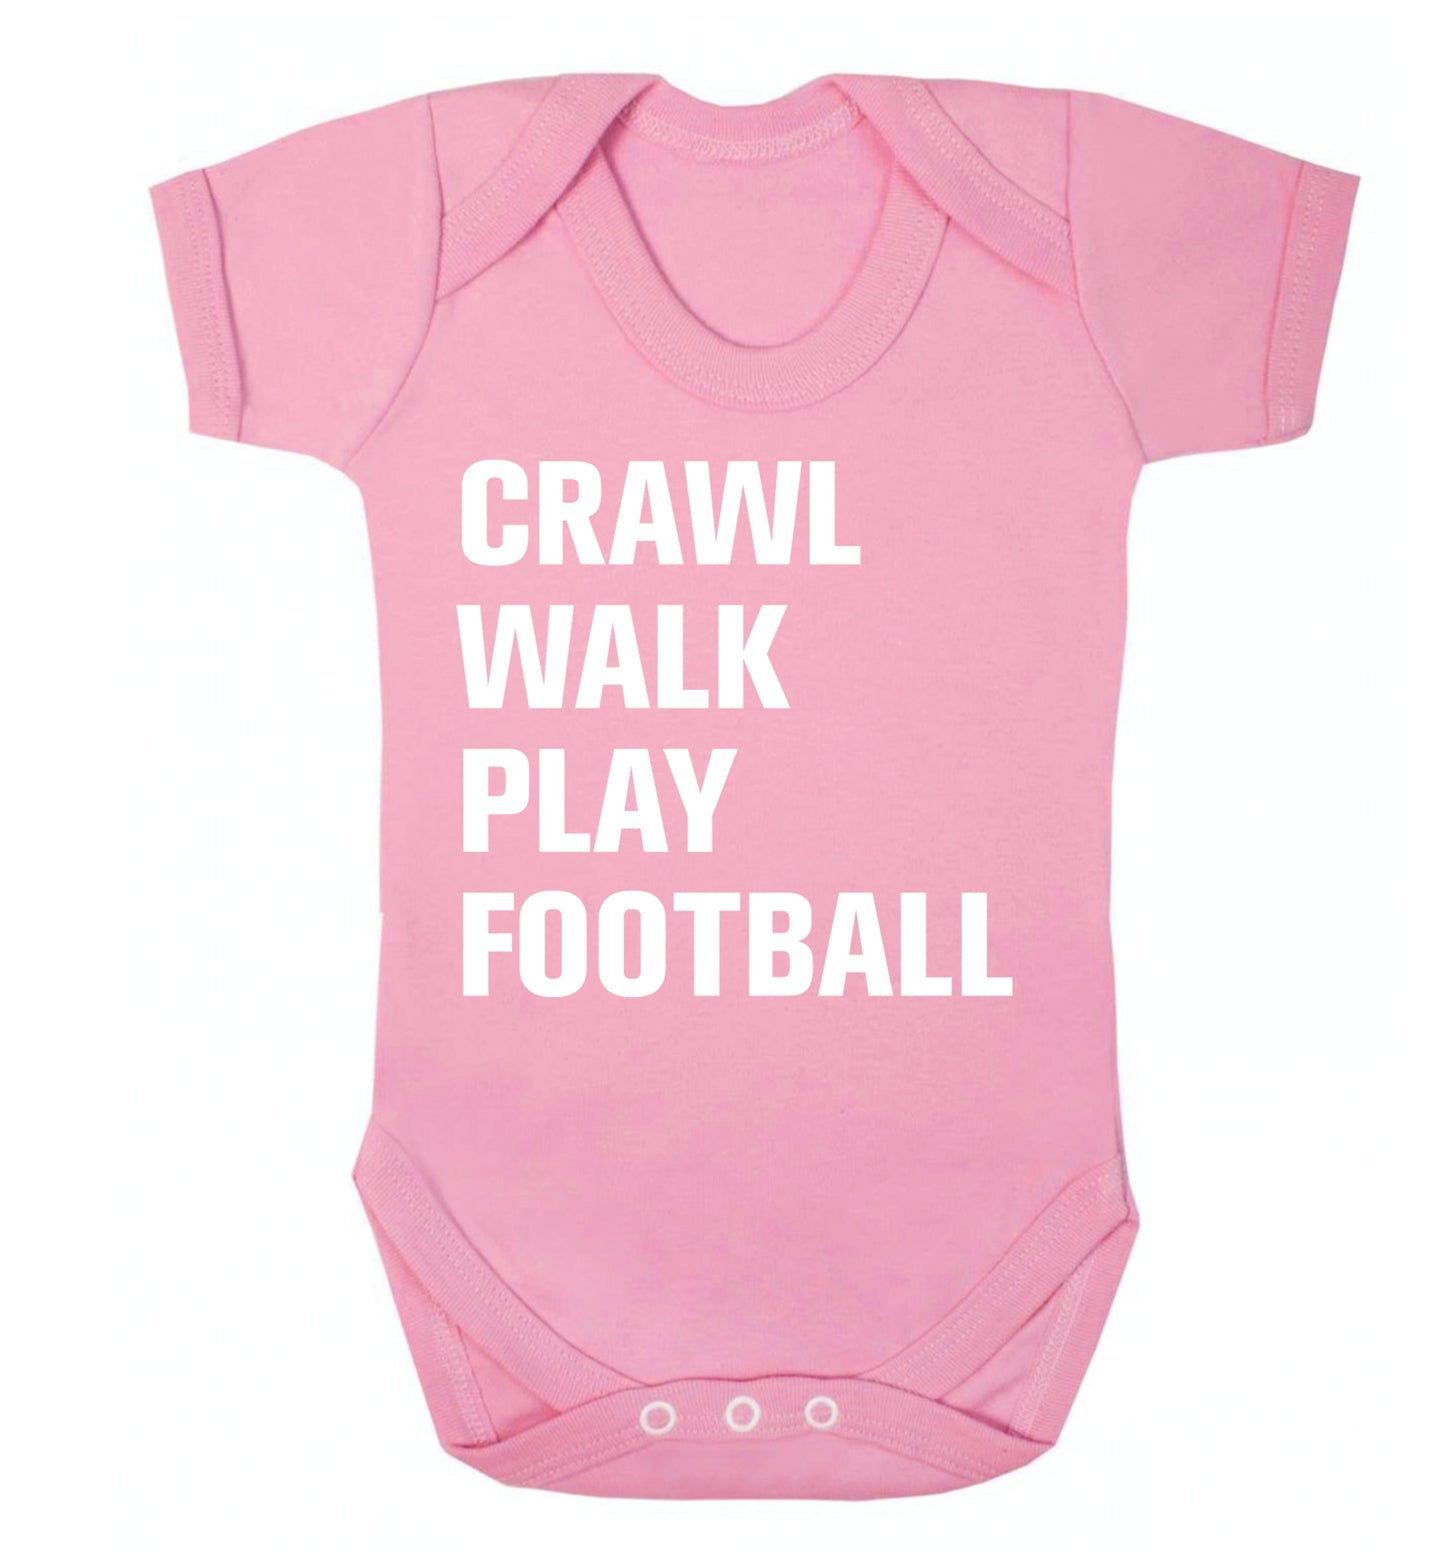 Crawl, walk, play football Baby Vest pale pink 18-24 months